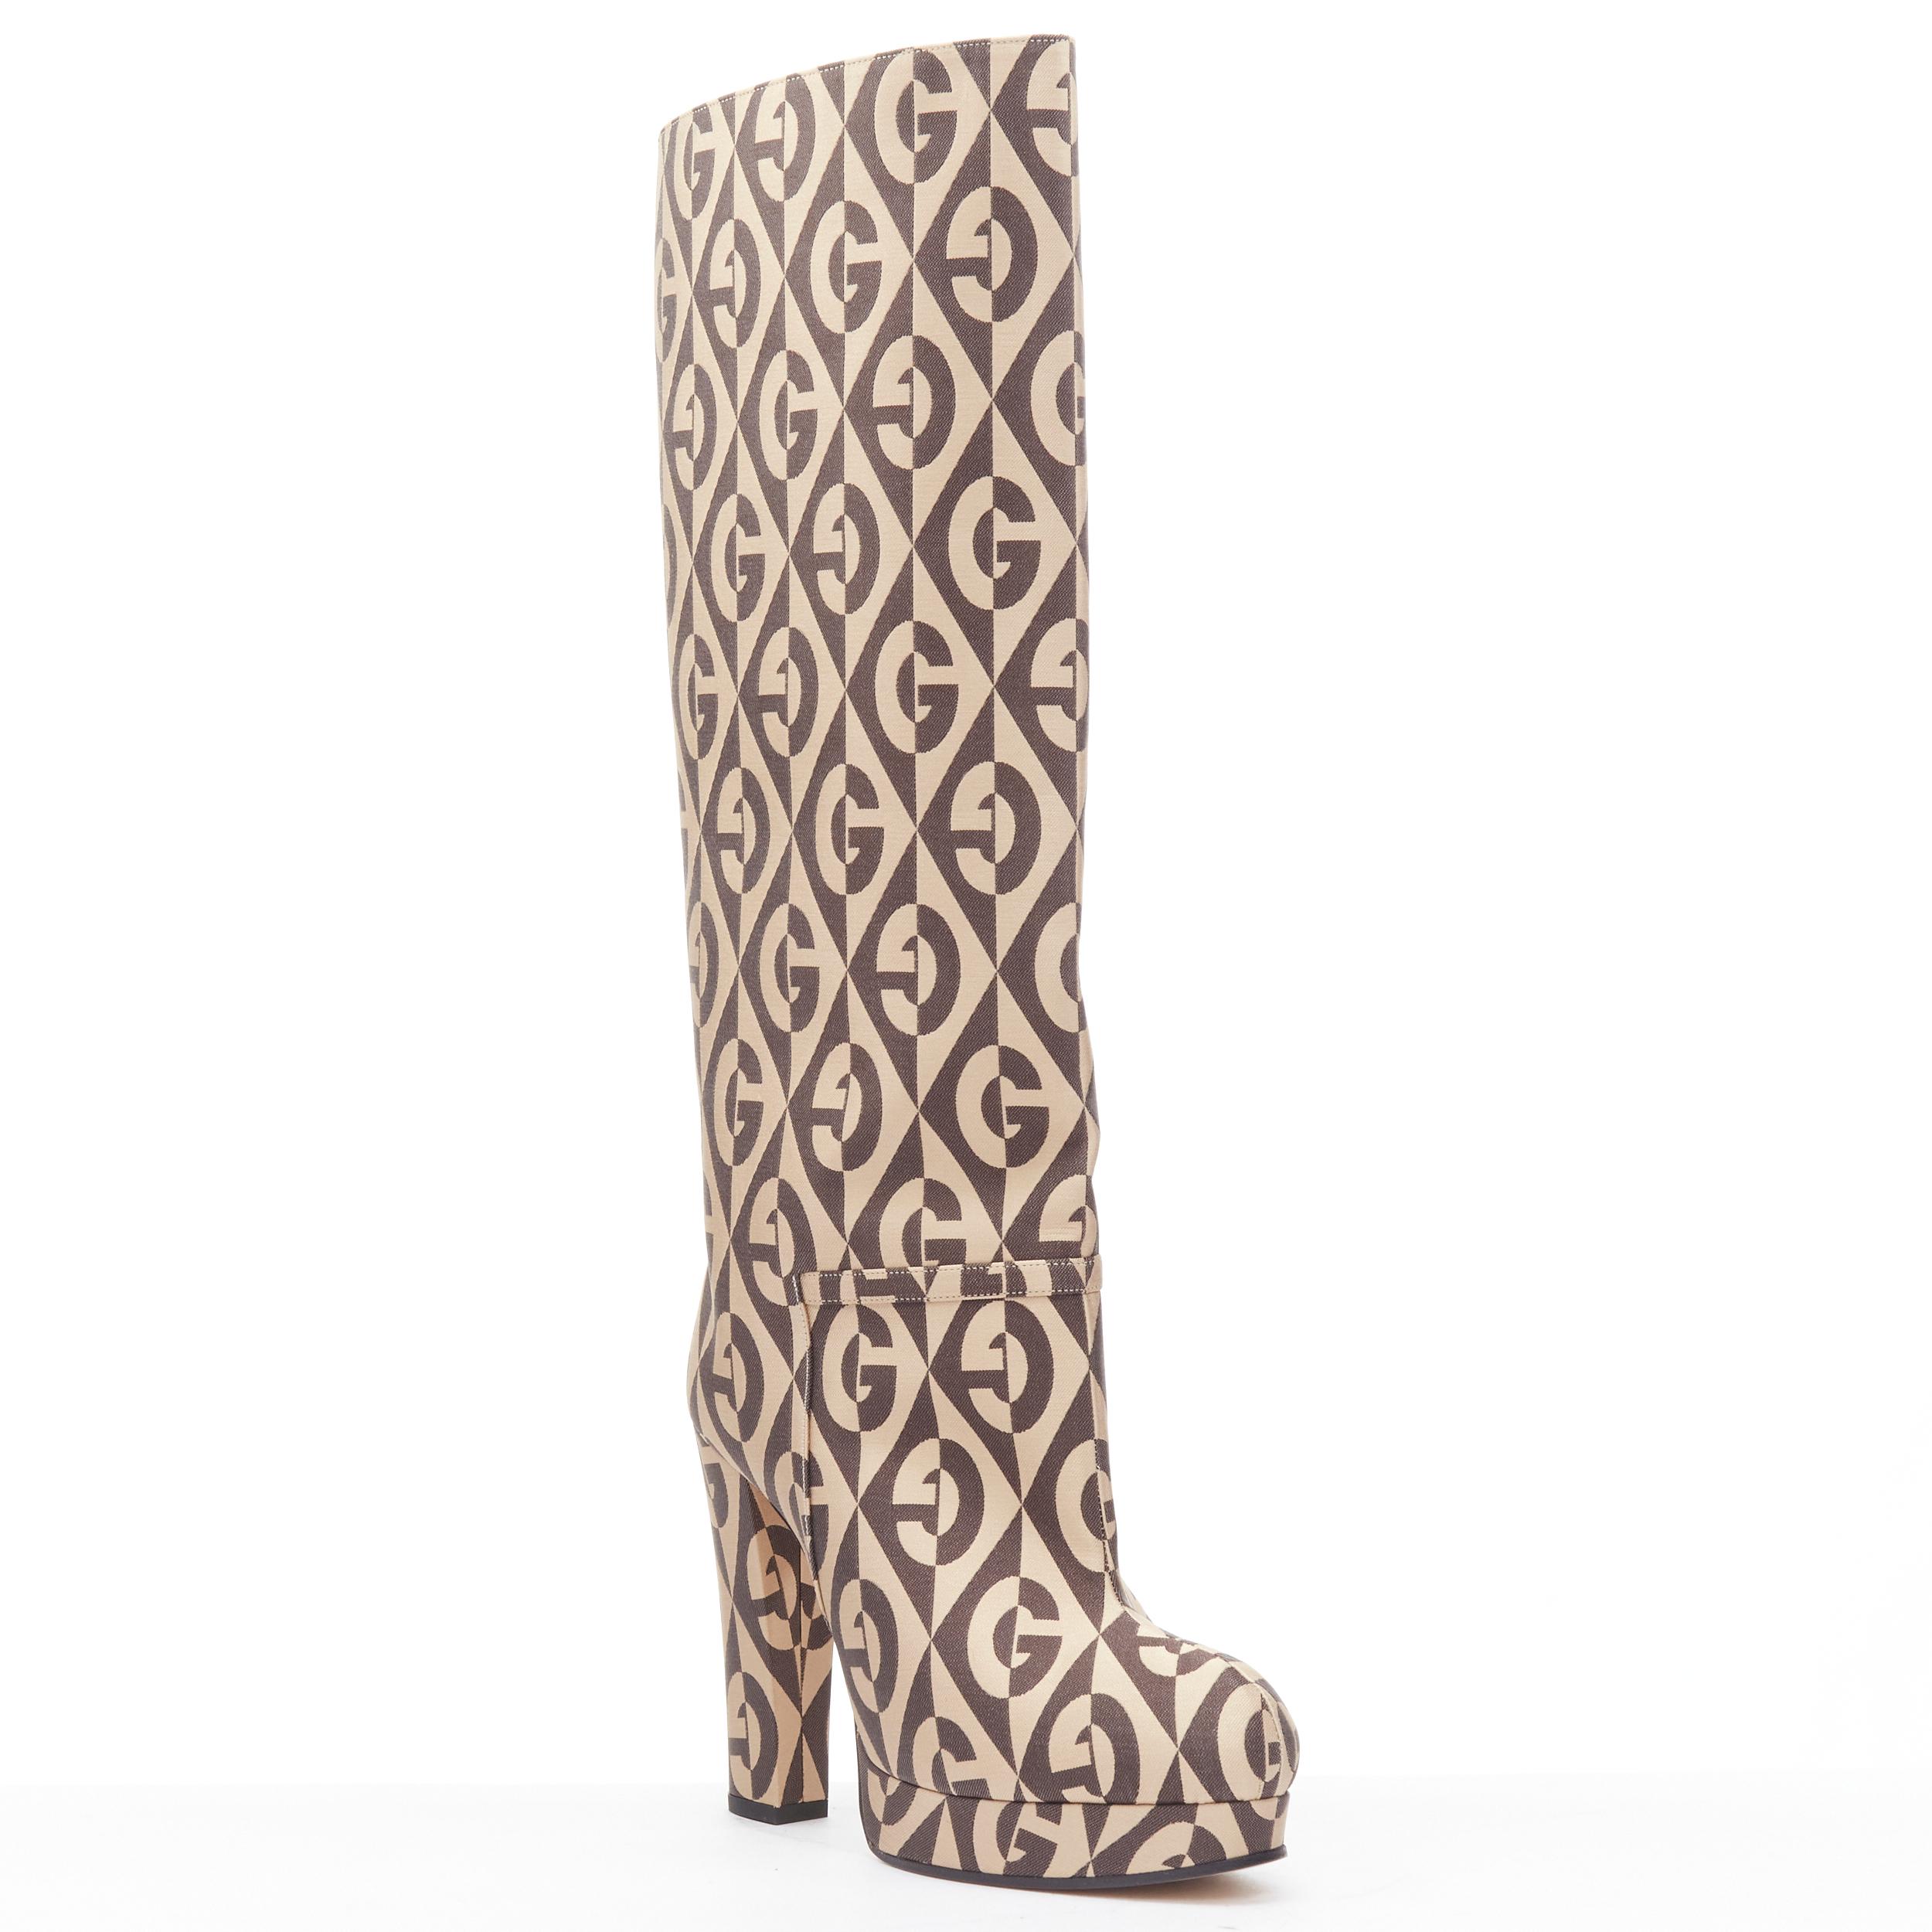 new GUCCI Mini Diamond B Face GG monogram jacquard platform boot EU36
Reference: TGAS/B01666
Brand: Gucci
Designer: Alessandro Michele
Material: Fabric
Color: Brown
Pattern: Geometric
Extra Detail: Pull on boots. 
Made in: Italy

CONDITION: